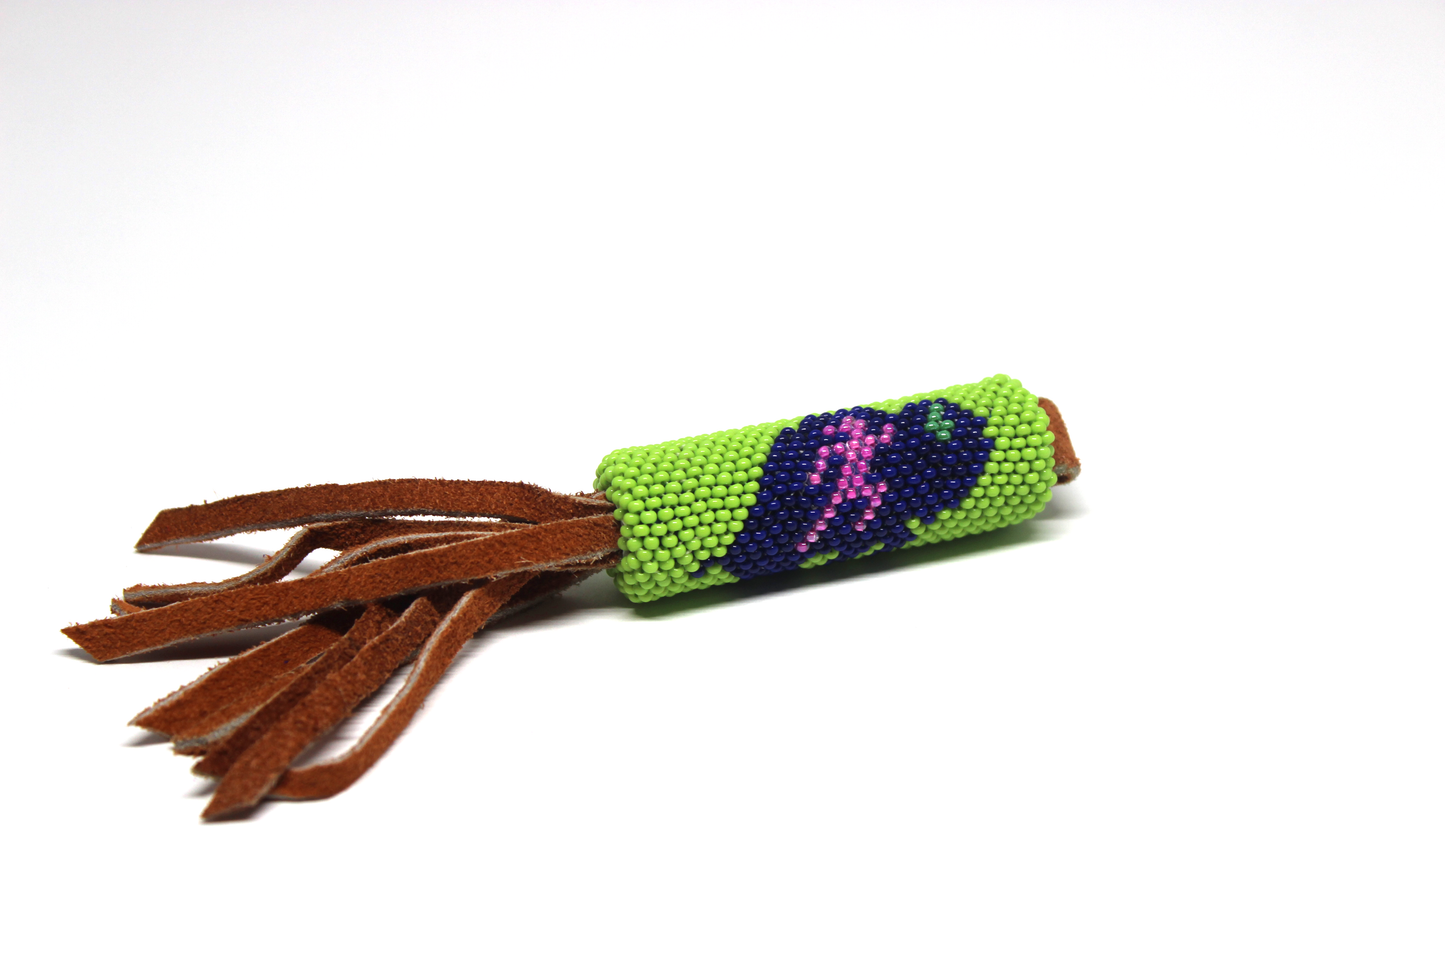 Robert Horse - Runner's Beaded Keychain - Intertribal Creatives by Running Strong for American Indian Youth